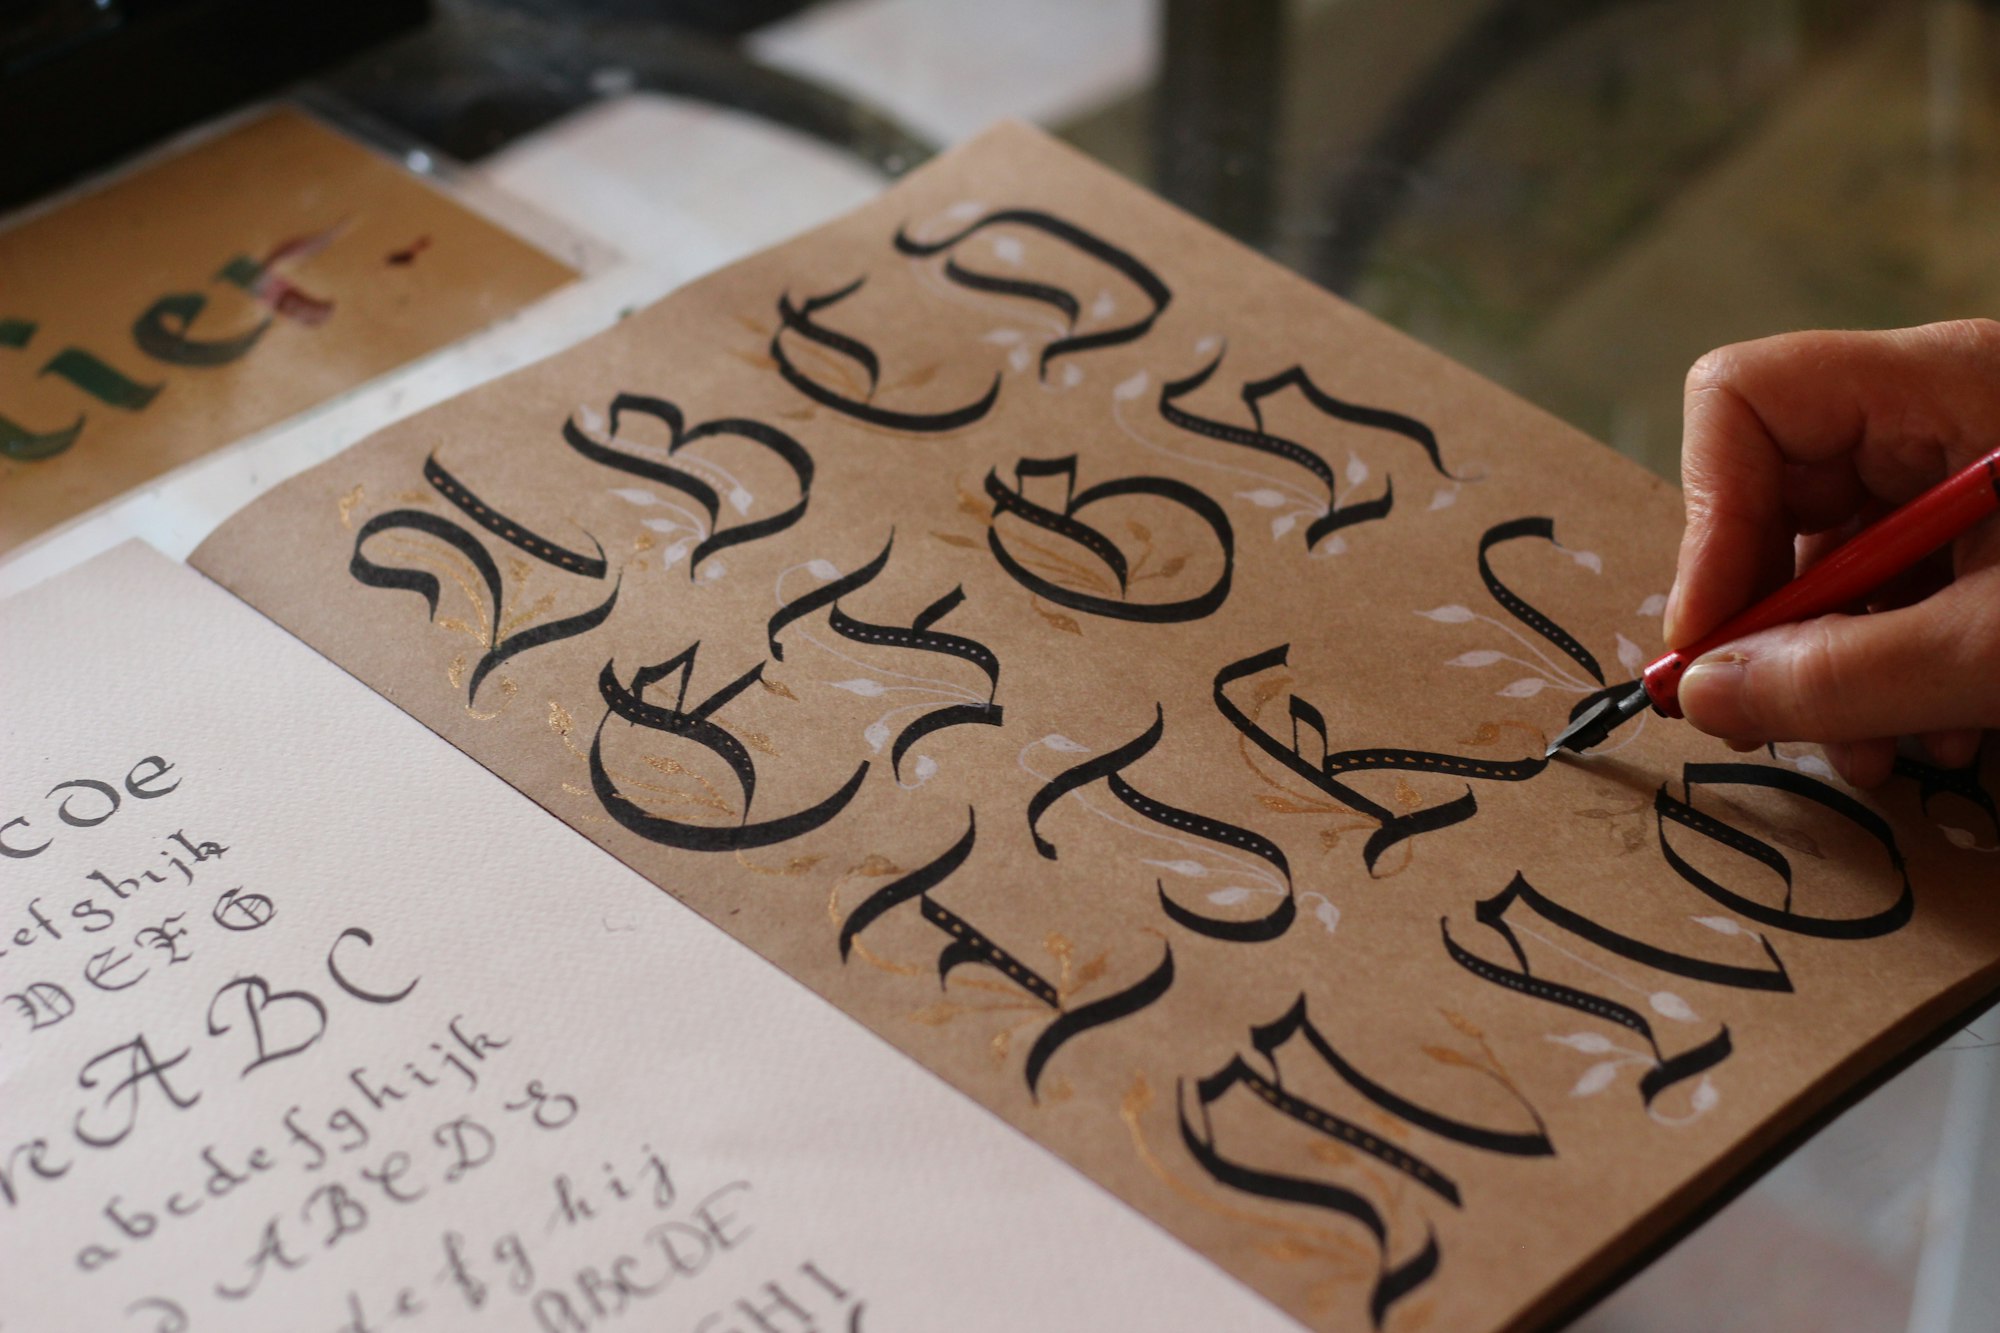 How To Learn Calligraphy For Free - Start Today!